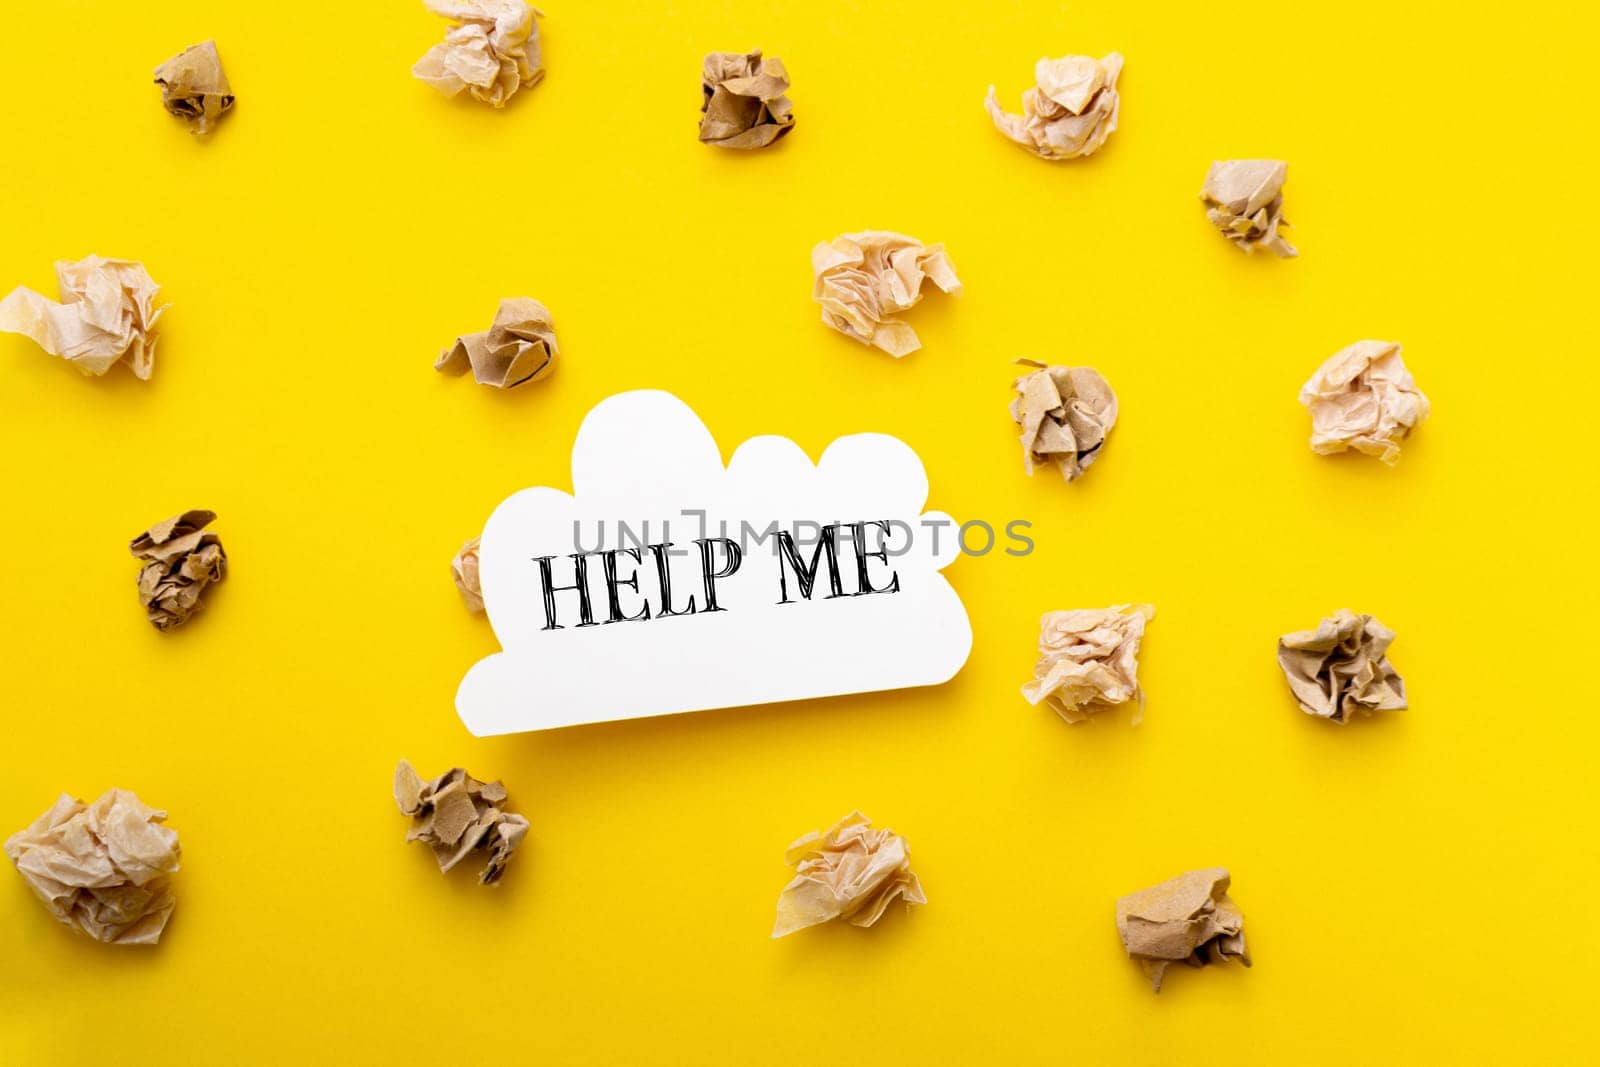 A yellow background with a white sign that says Help Me on it. The sign is surrounded by shredded paper